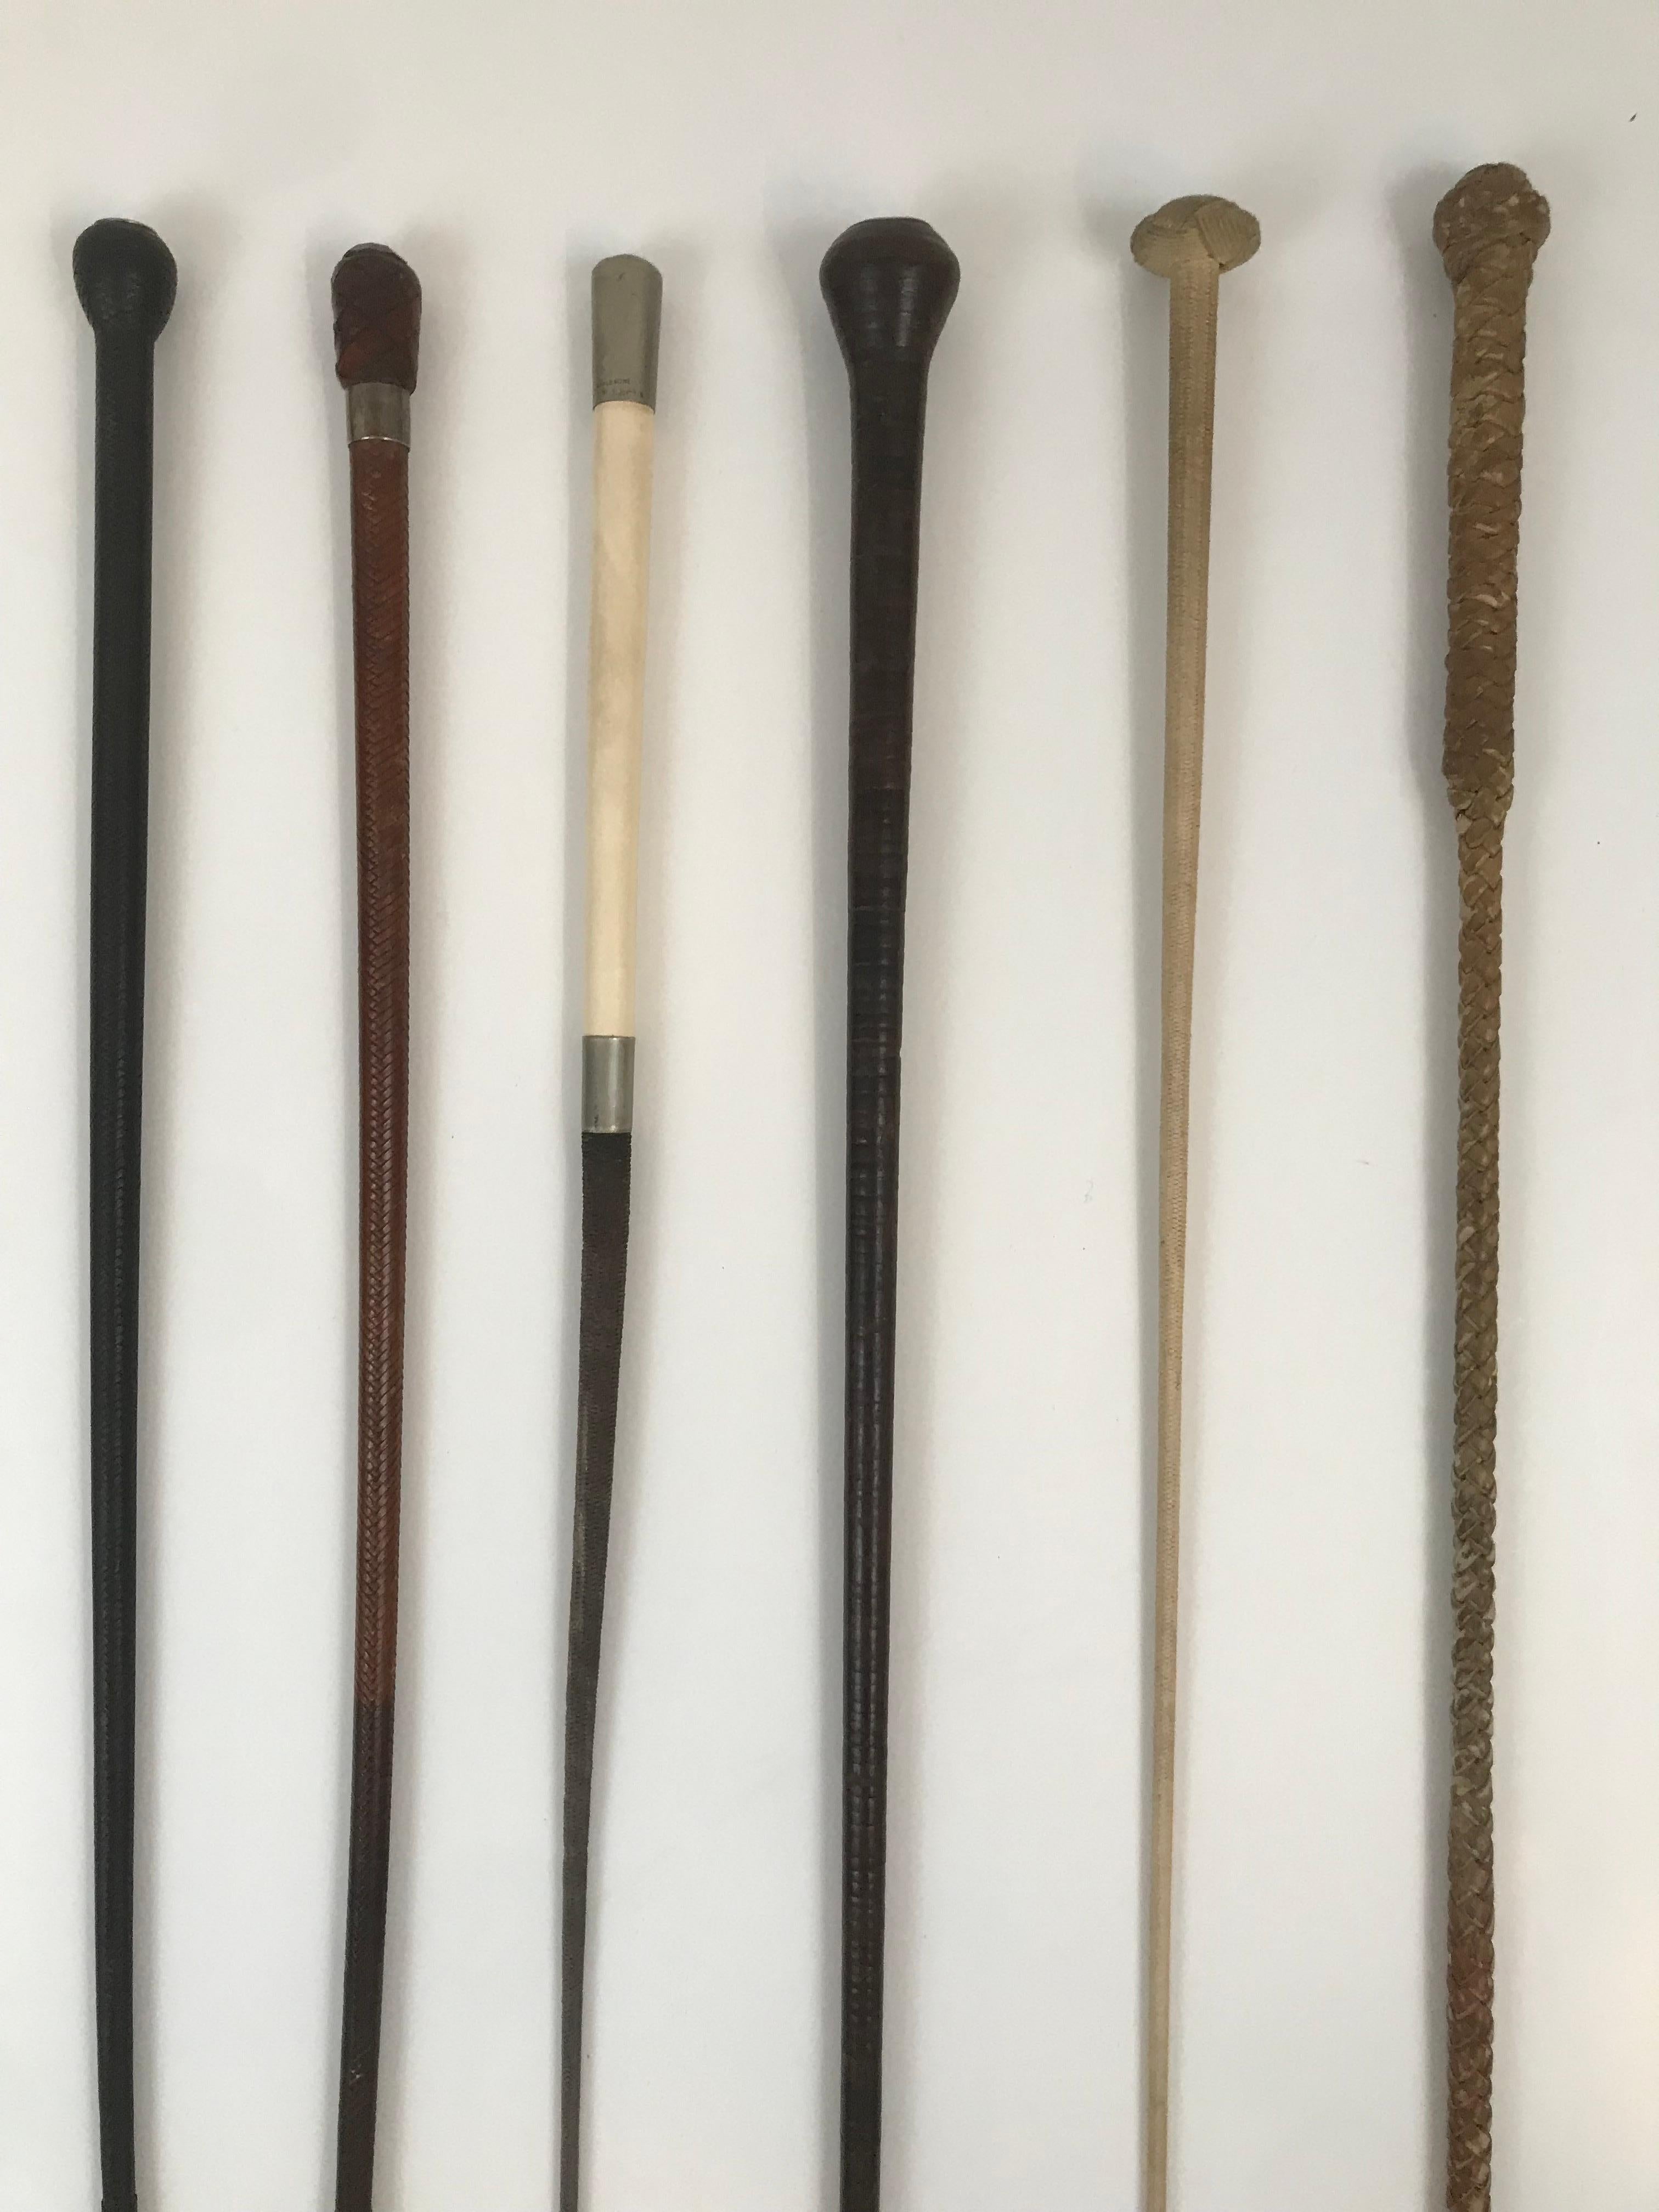 A collection of rare riding crops and swagger sticks dating from the mid 1800's through the contemporary era. From the left in photo one descriptions are as follows. 

1. 2000's Hermes riding crop in dark brown leather in unused excellent